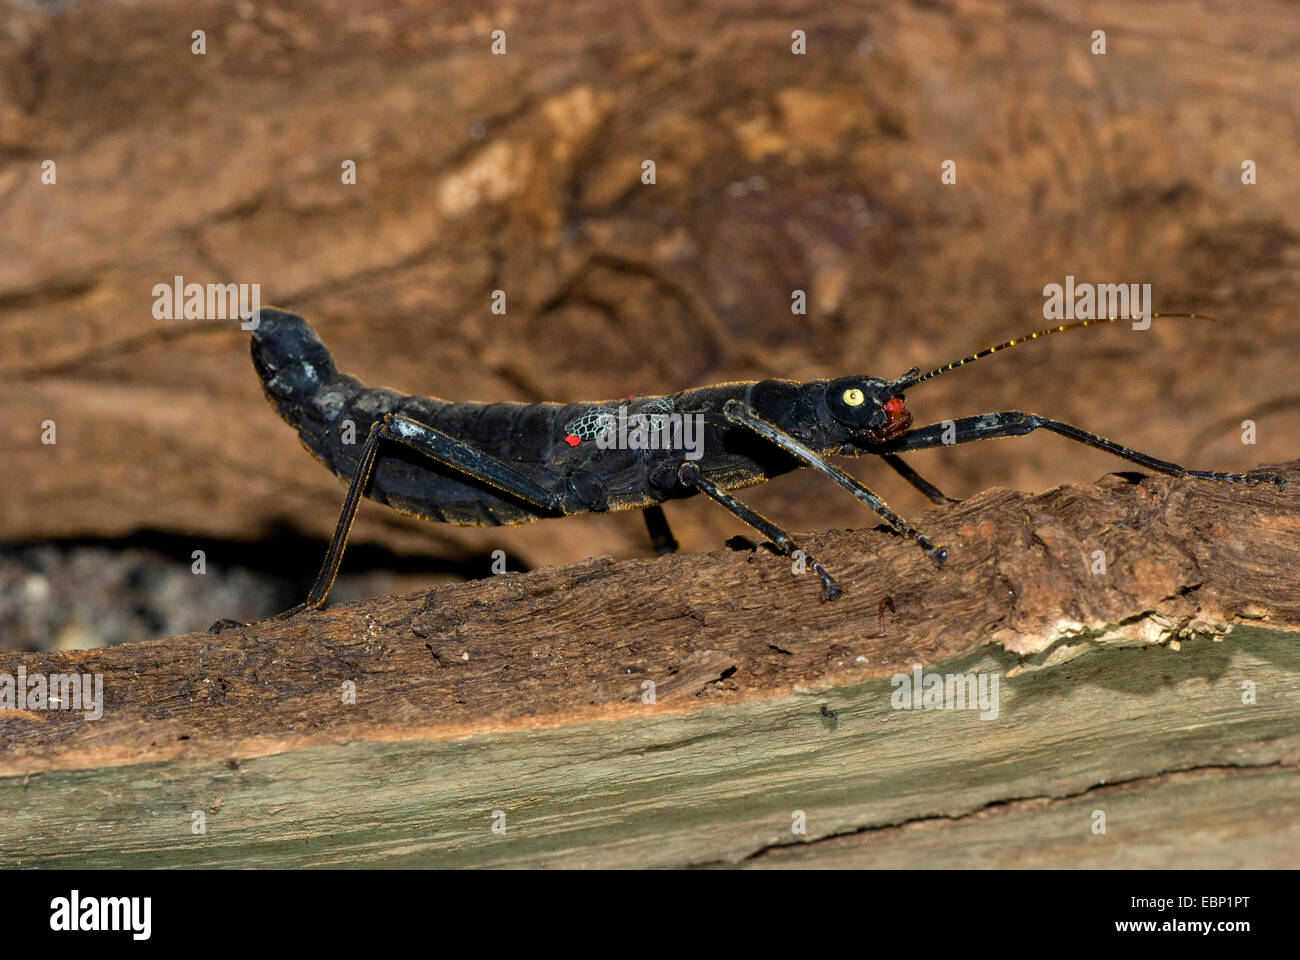 Stick insect (Peruphasma schultei), on deadwood Stock Photo